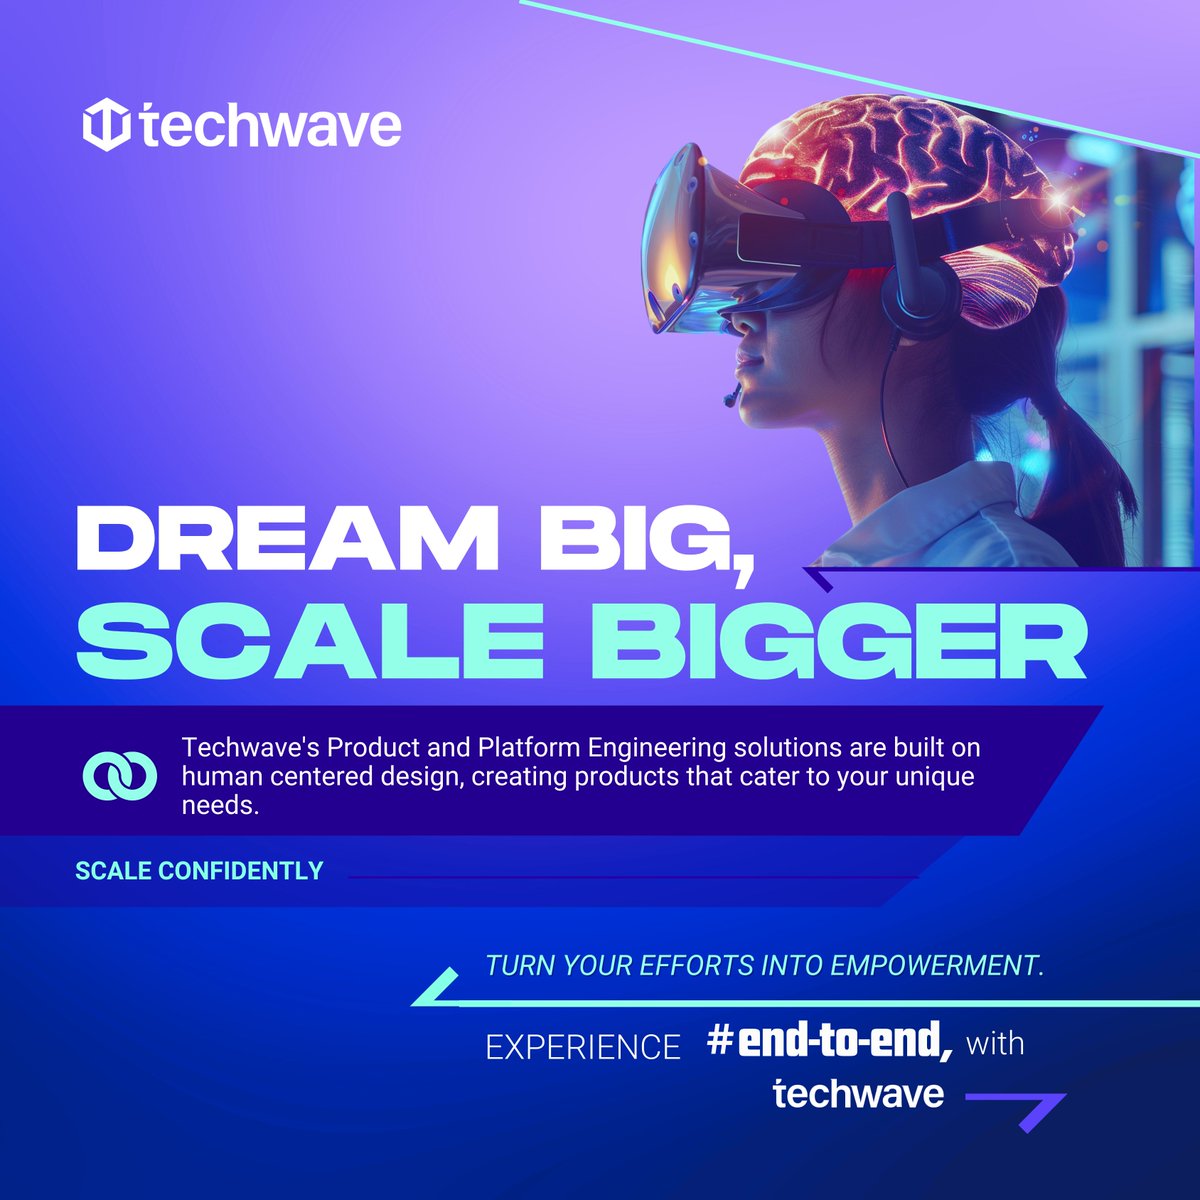 Embark on an end-to-end transformative journey with Techwave's Product and Platform Engineering services. We enable your business to achieve its digital aspirations from design to integration and automation. Connect with us today - techwave.net/digital-transf… #techwave #EndtoEnd